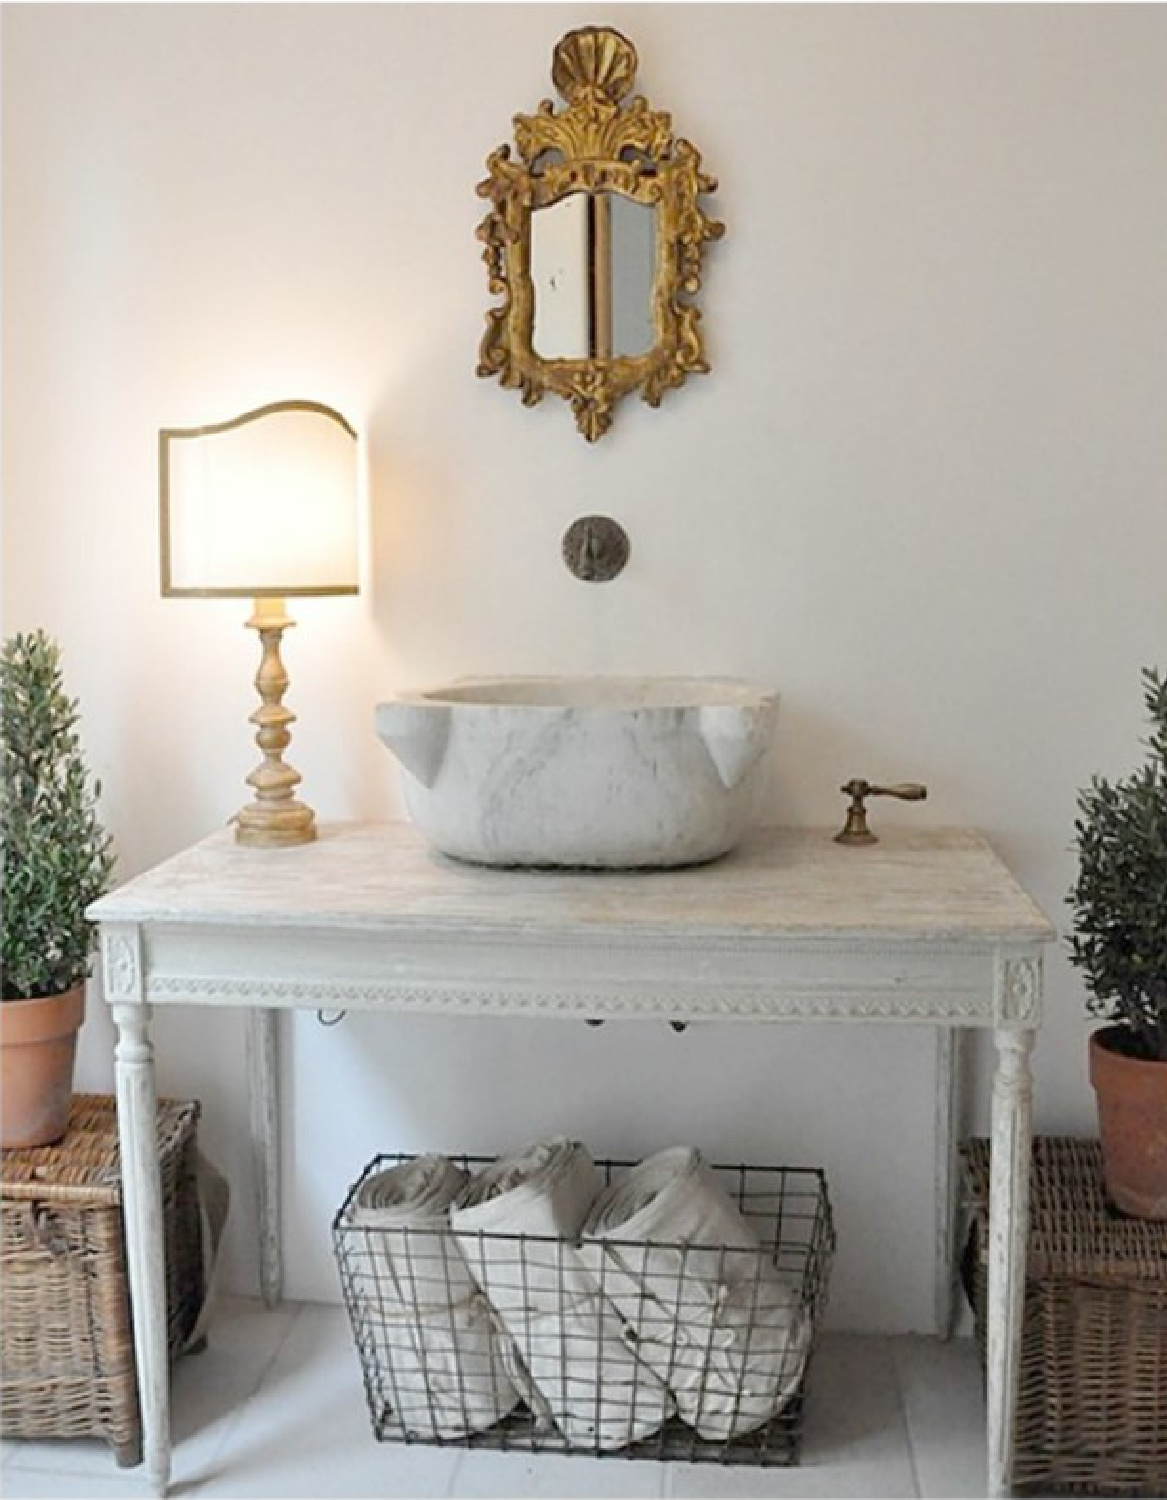 Beautiful Swedish antique repurposed vanity with vessel sink in French country bath - Brooke Giannetti.